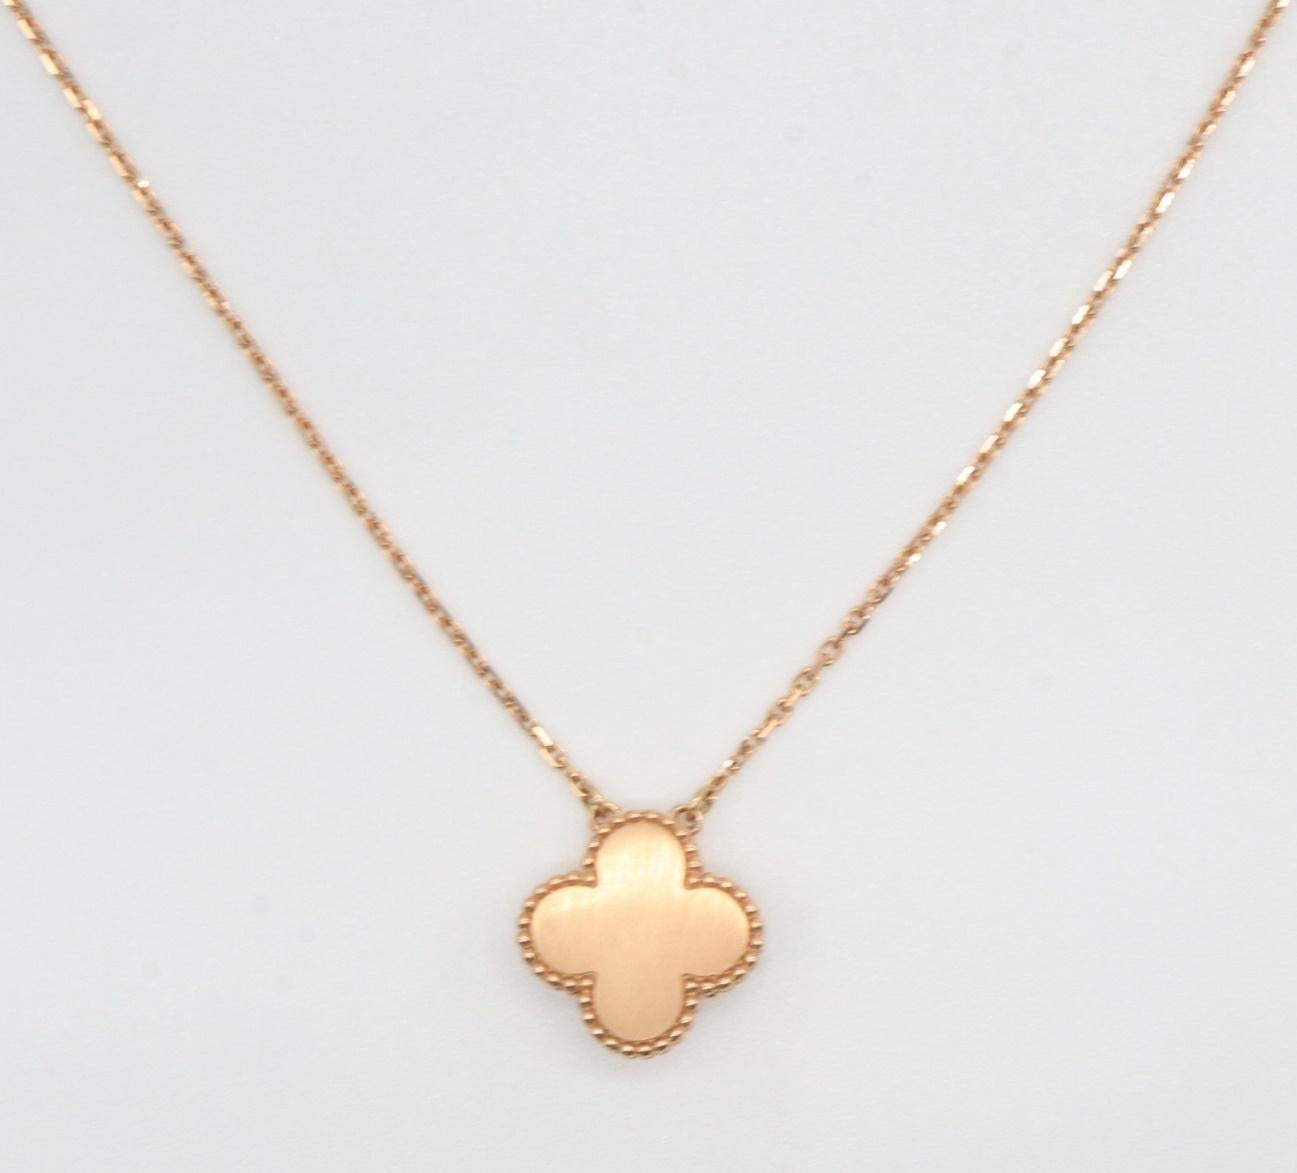 This is an authentic VAN CLEEF & ARPELS 18K Rose Gold Pink Porcelain Diamond Vintage Alhambra Pendant Necklace. This stunning necklace chain is crafted of 18 karat rose gold. The pendant is in the shape of a small clover set with pink porcelain and